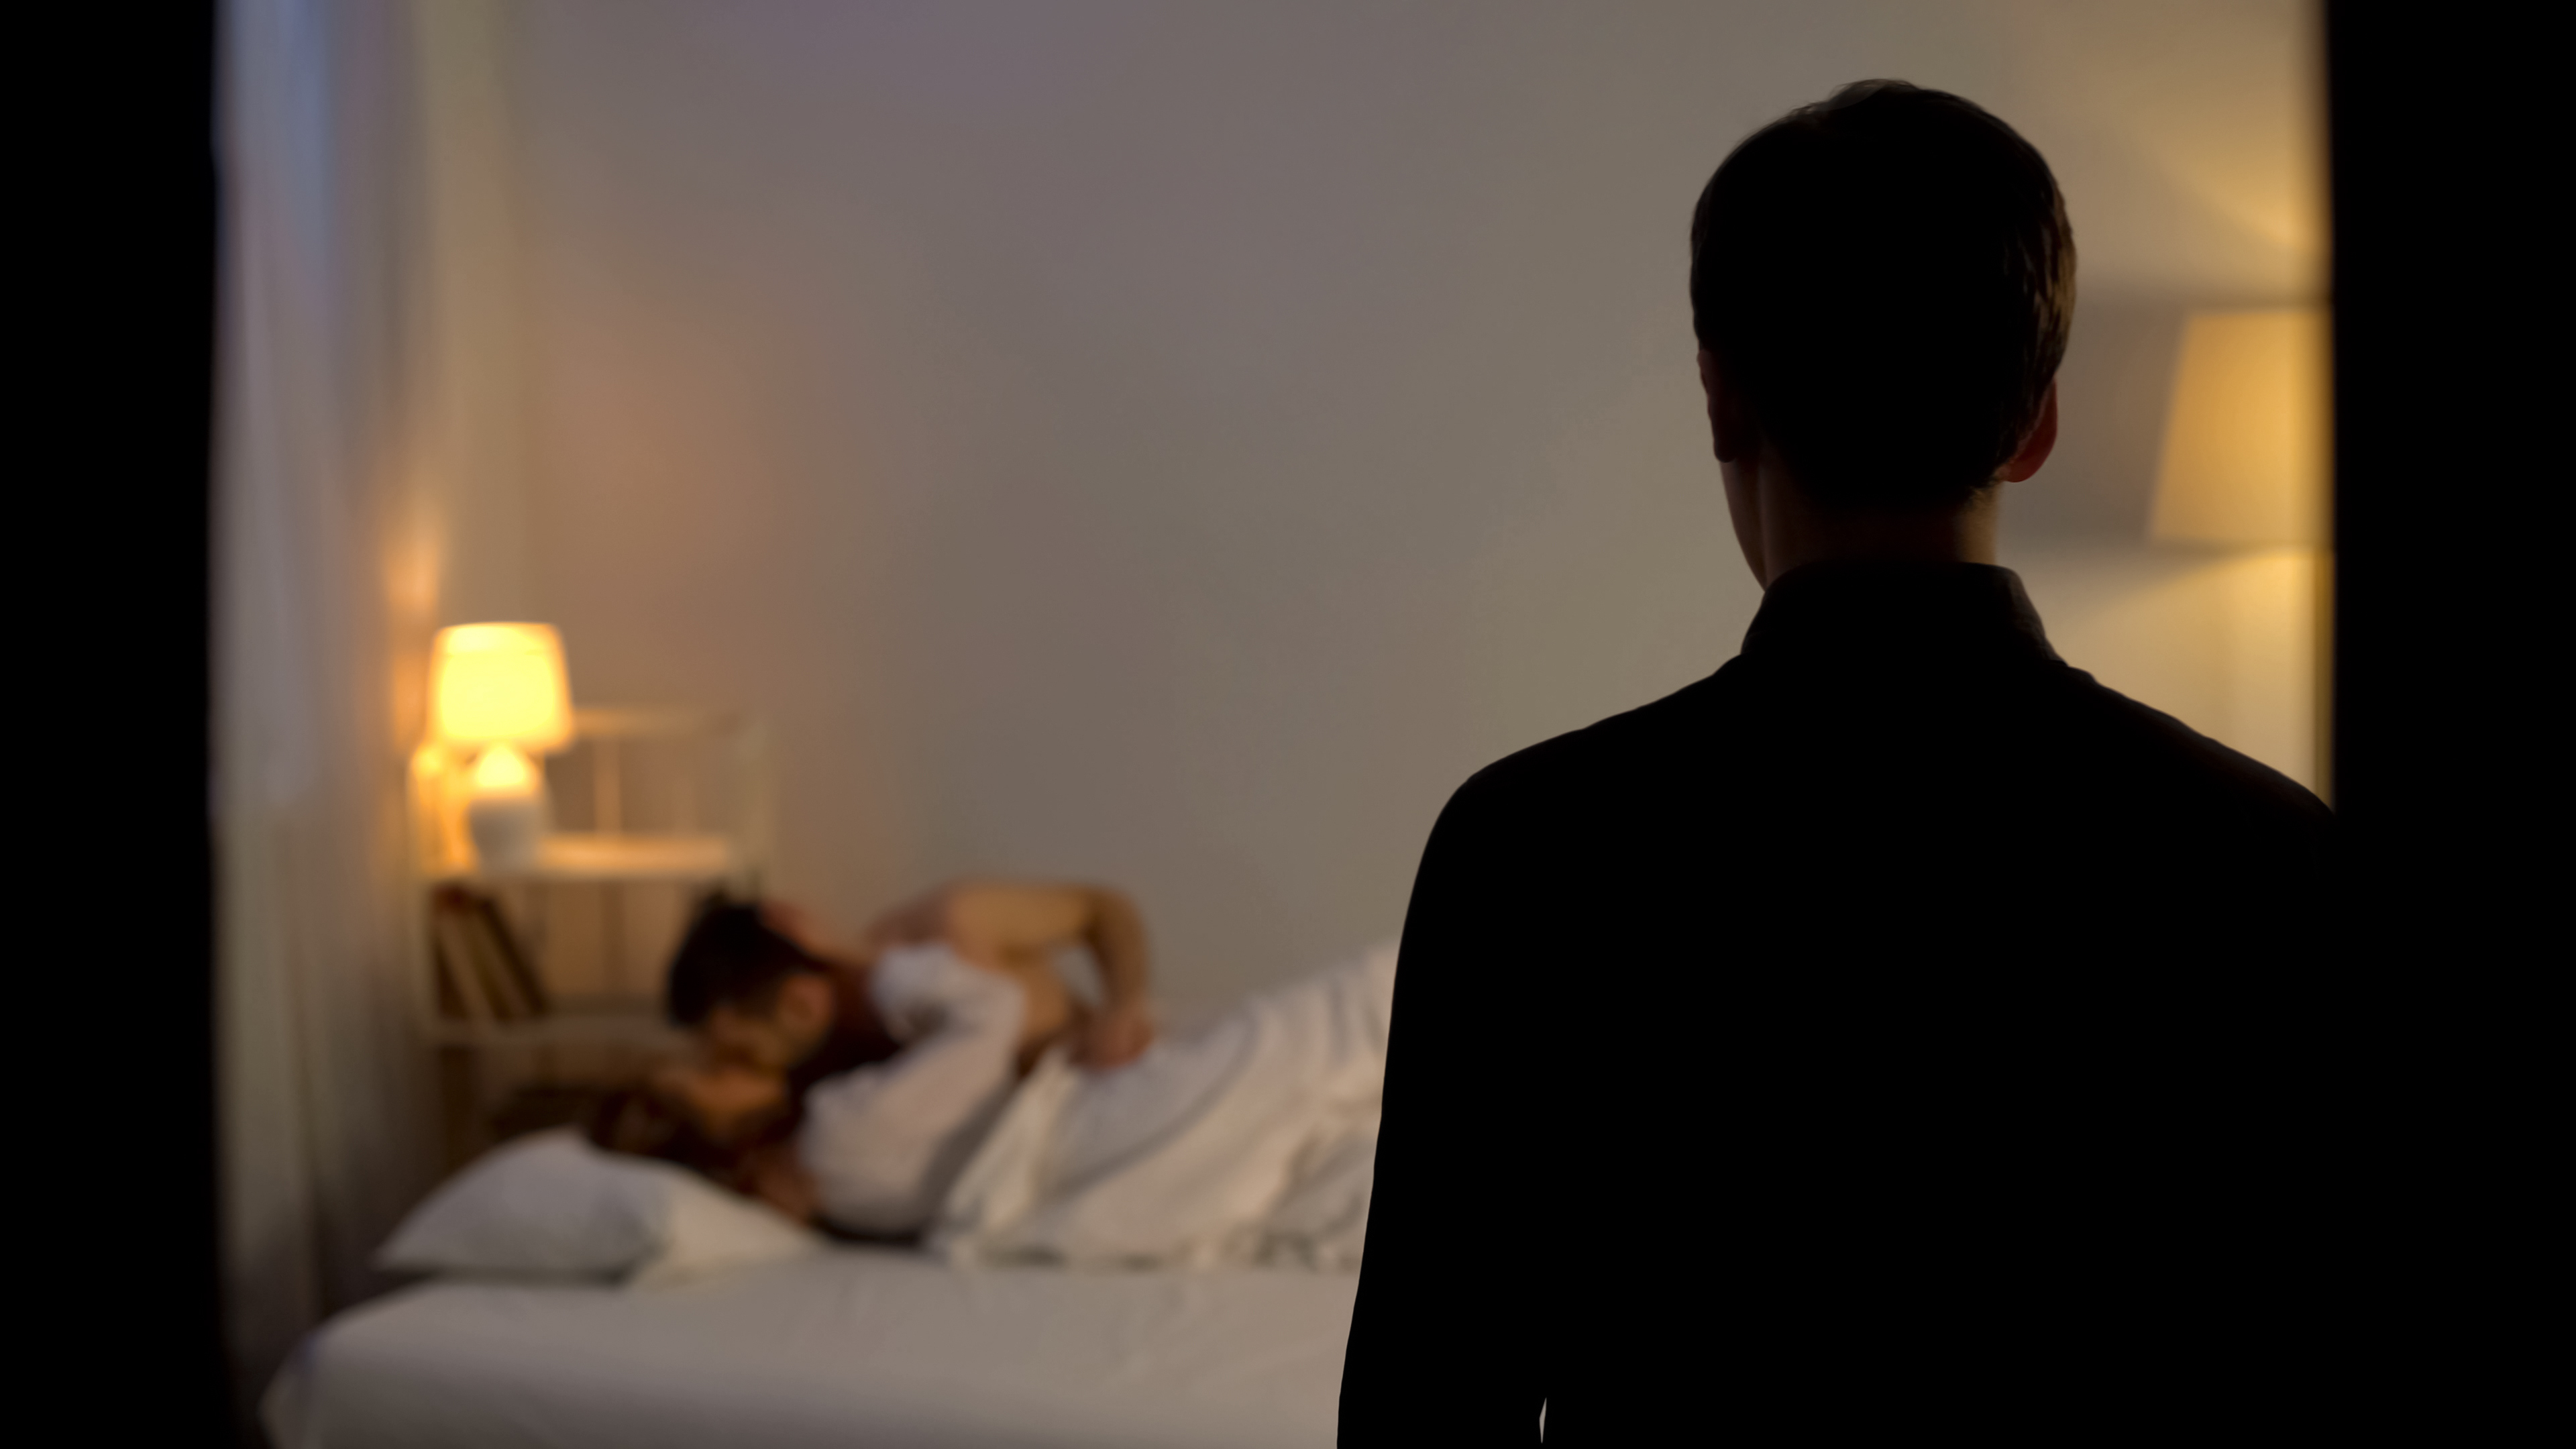 Woman walking in to find husband in bed with someone else